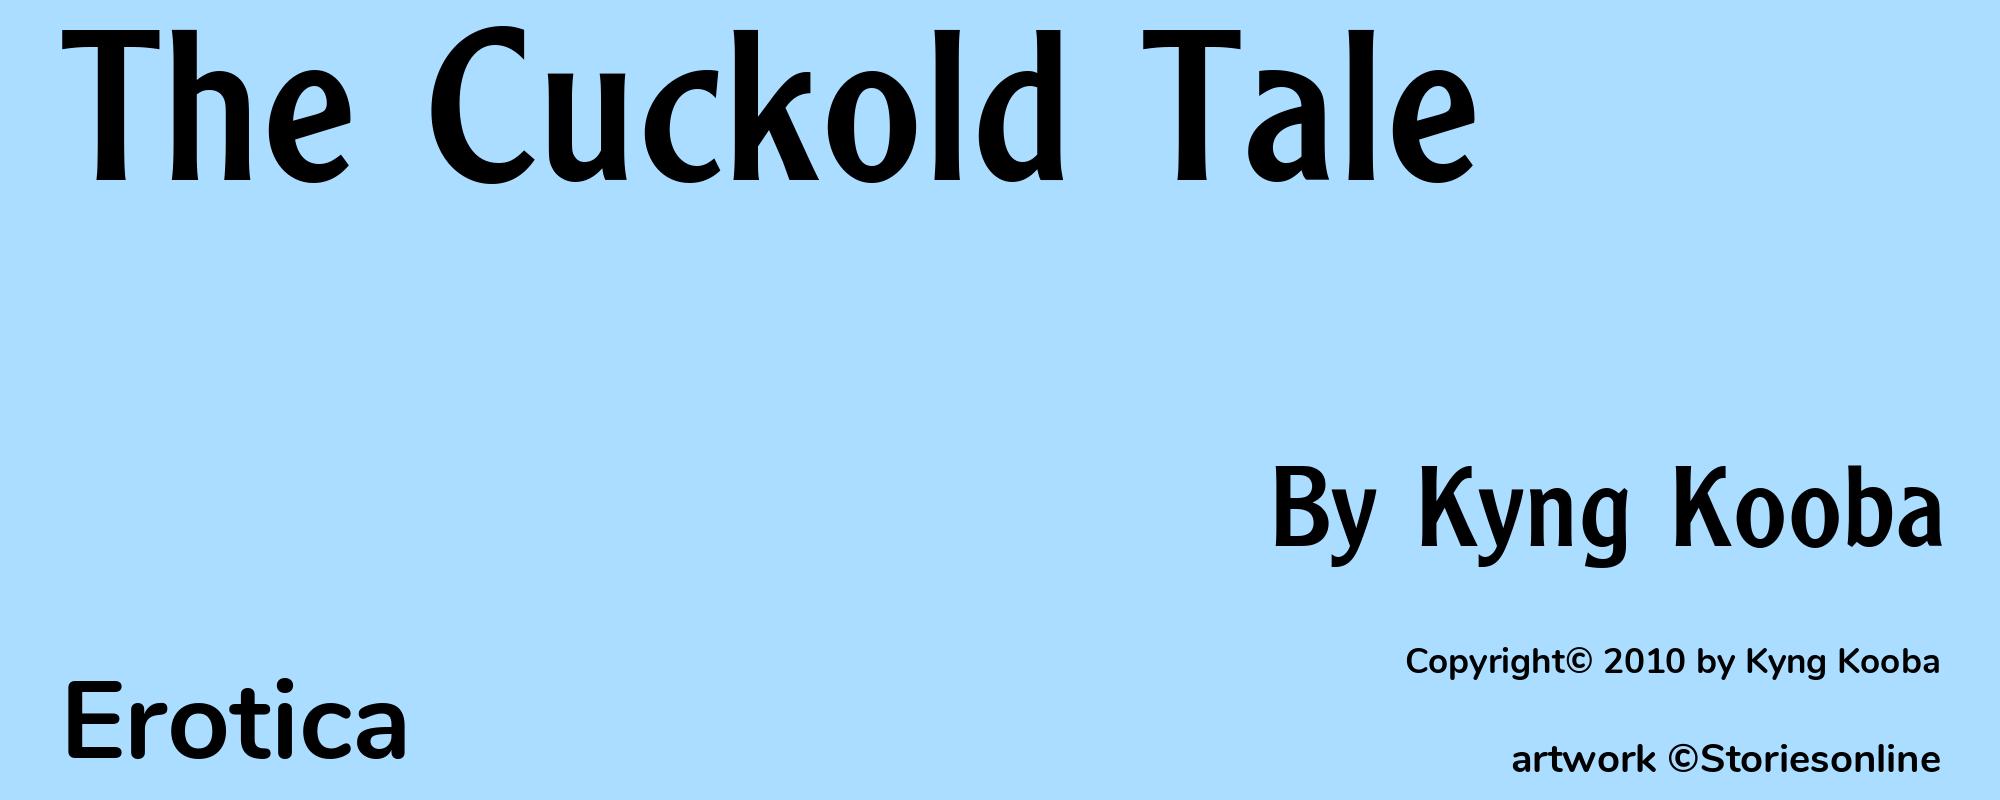 The Cuckold Tale - Cover